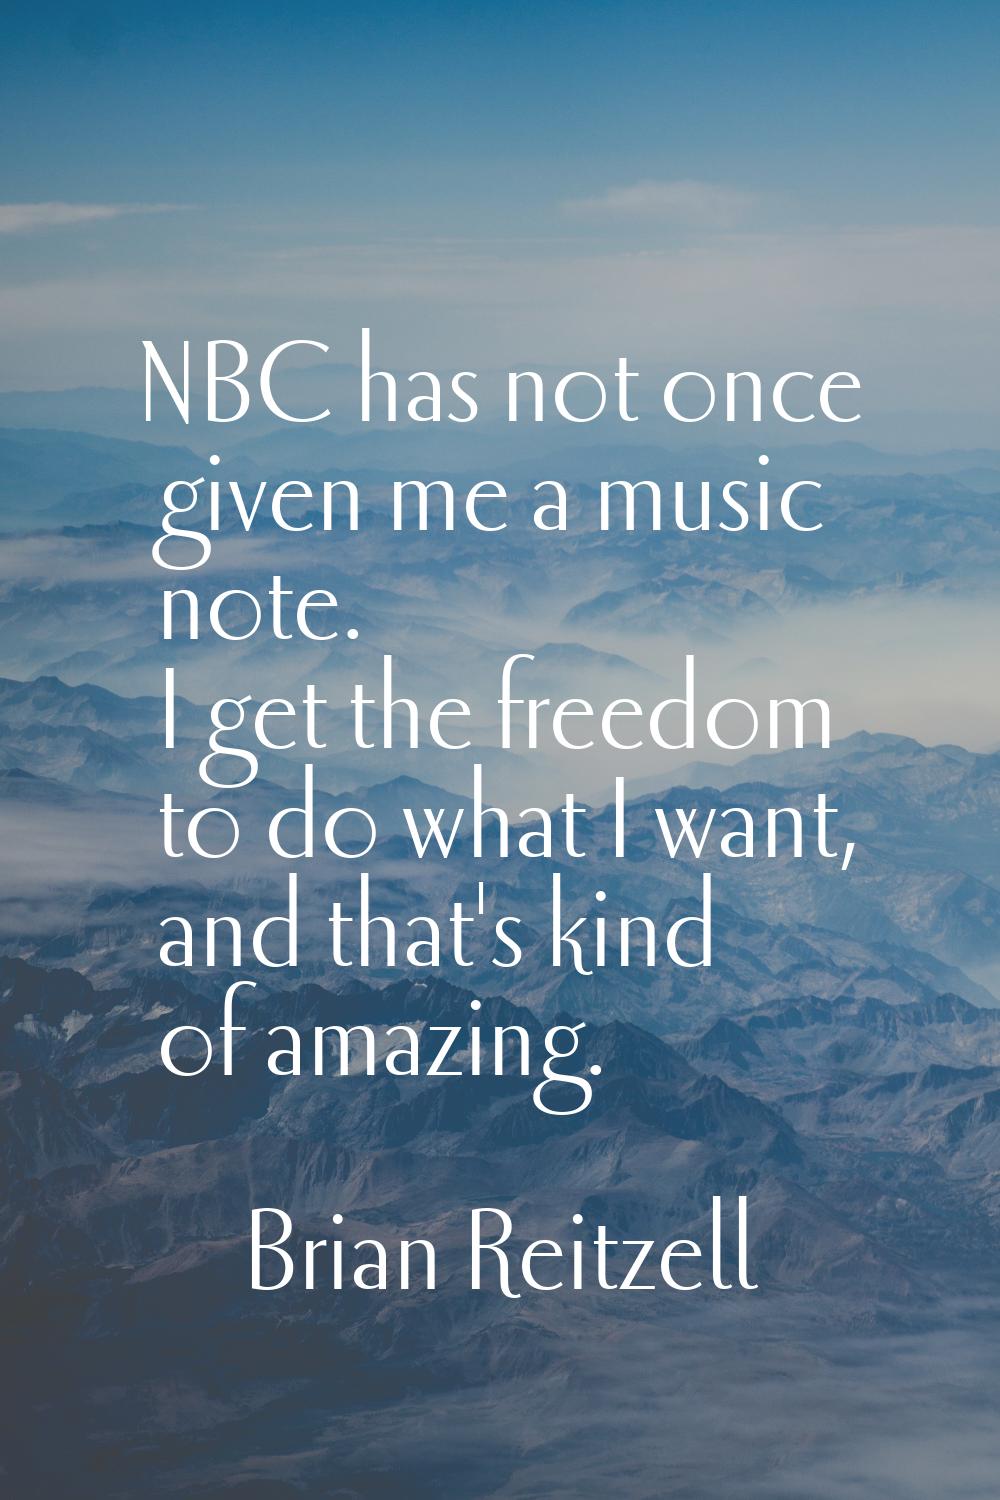 NBC has not once given me a music note. I get the freedom to do what I want, and that's kind of ama